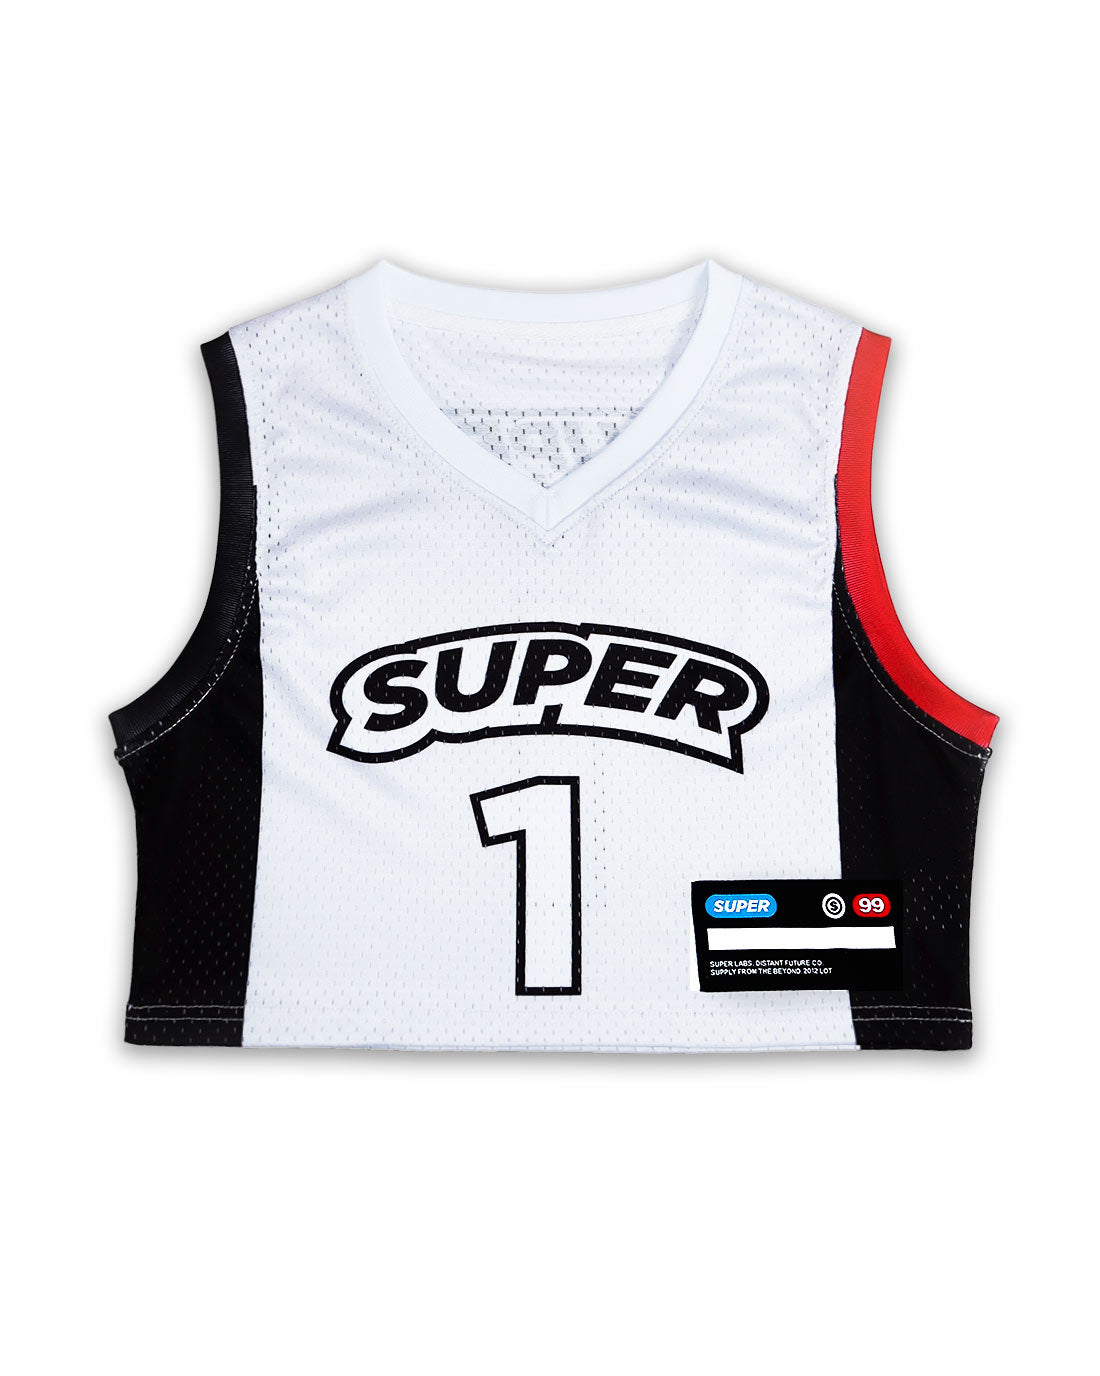 Front view of a women's basketball jersey crop top in sleek black and white, featuring lightweight mesh fabric, sleeveless design, and number 1 printed on the chest.